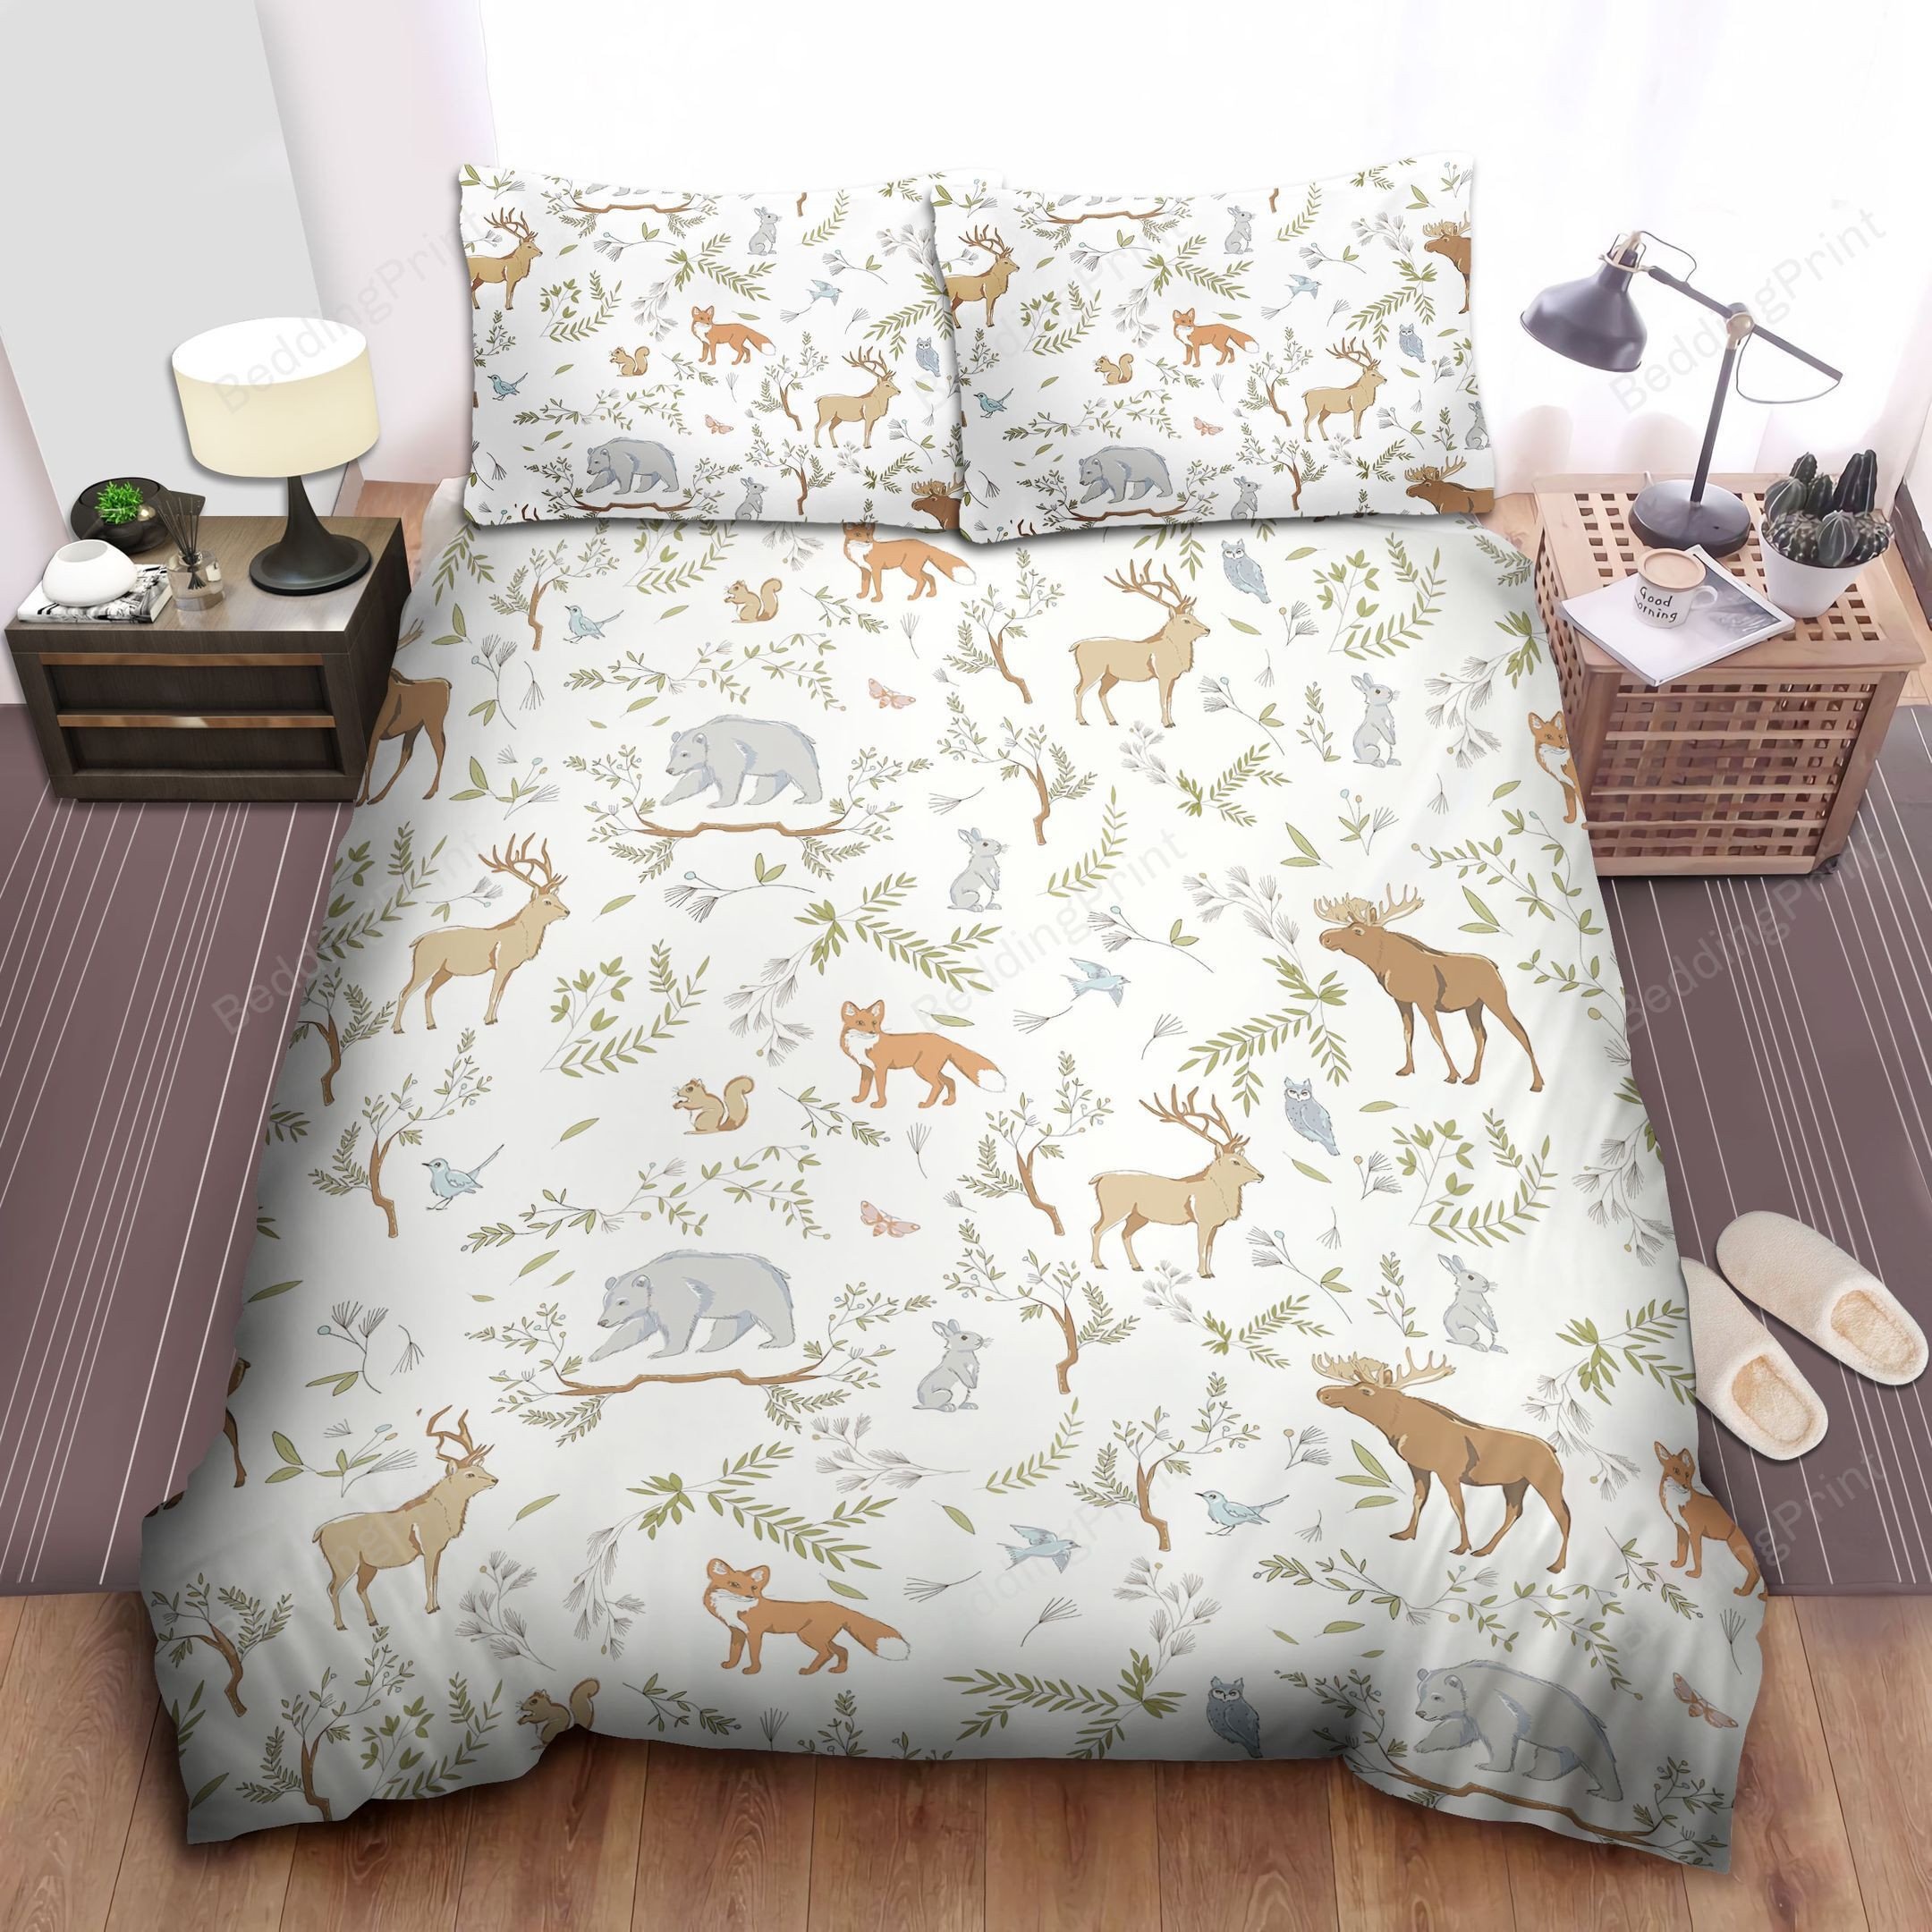 Woodland Bedding Sets (Duvet Cover & Pillow Cases) - HomeFavo